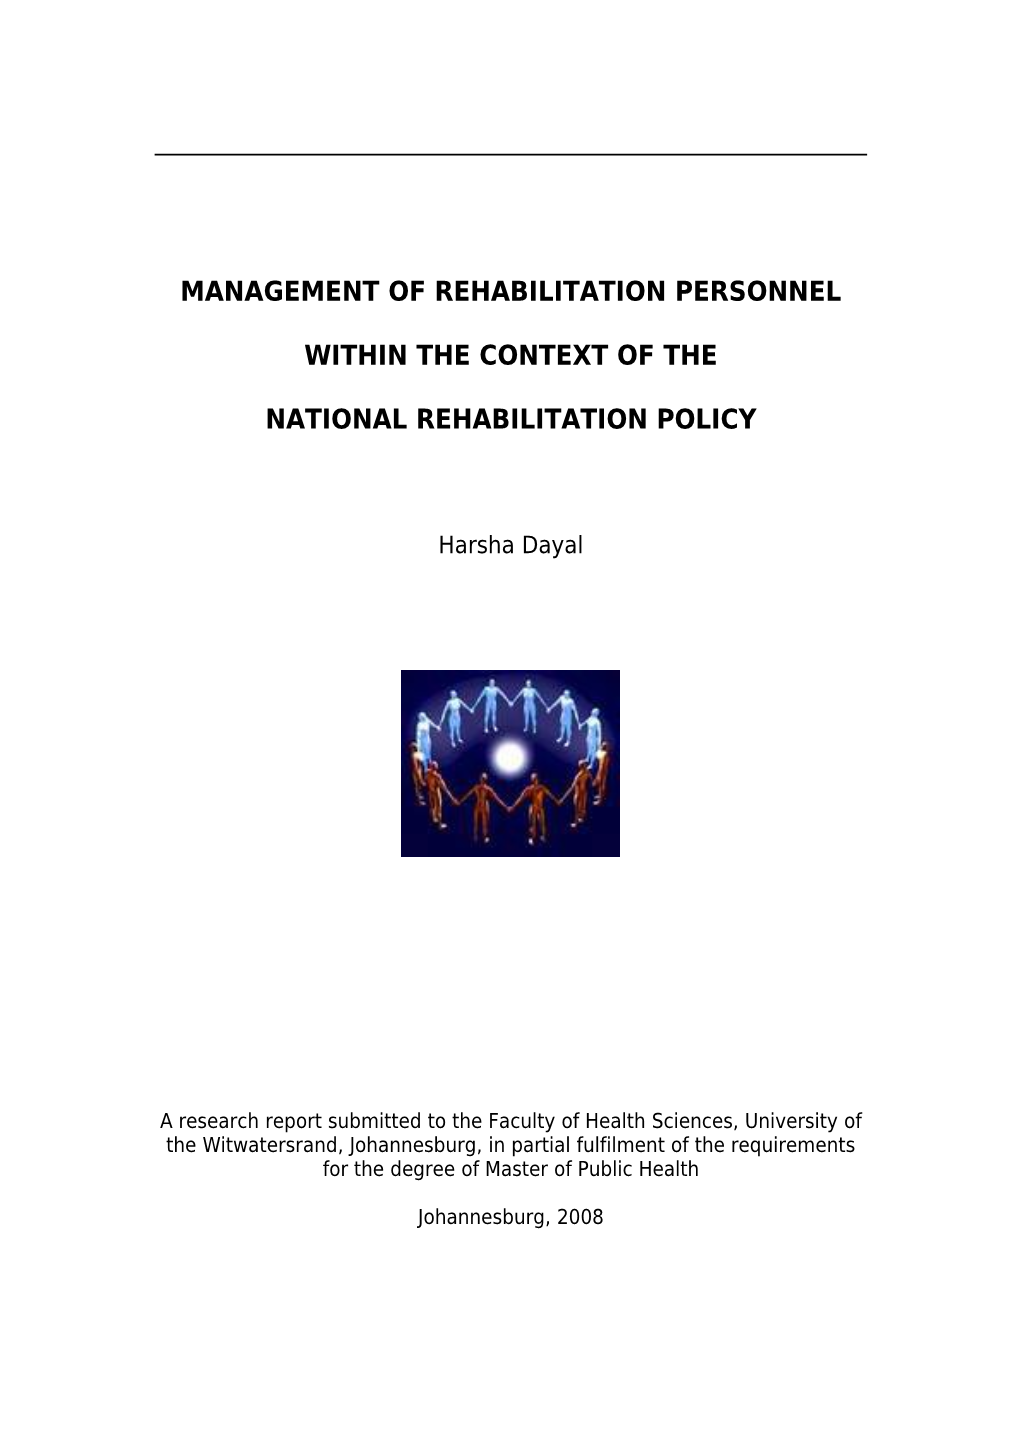 Management of Rehabilitation Personnel Within the Context of The